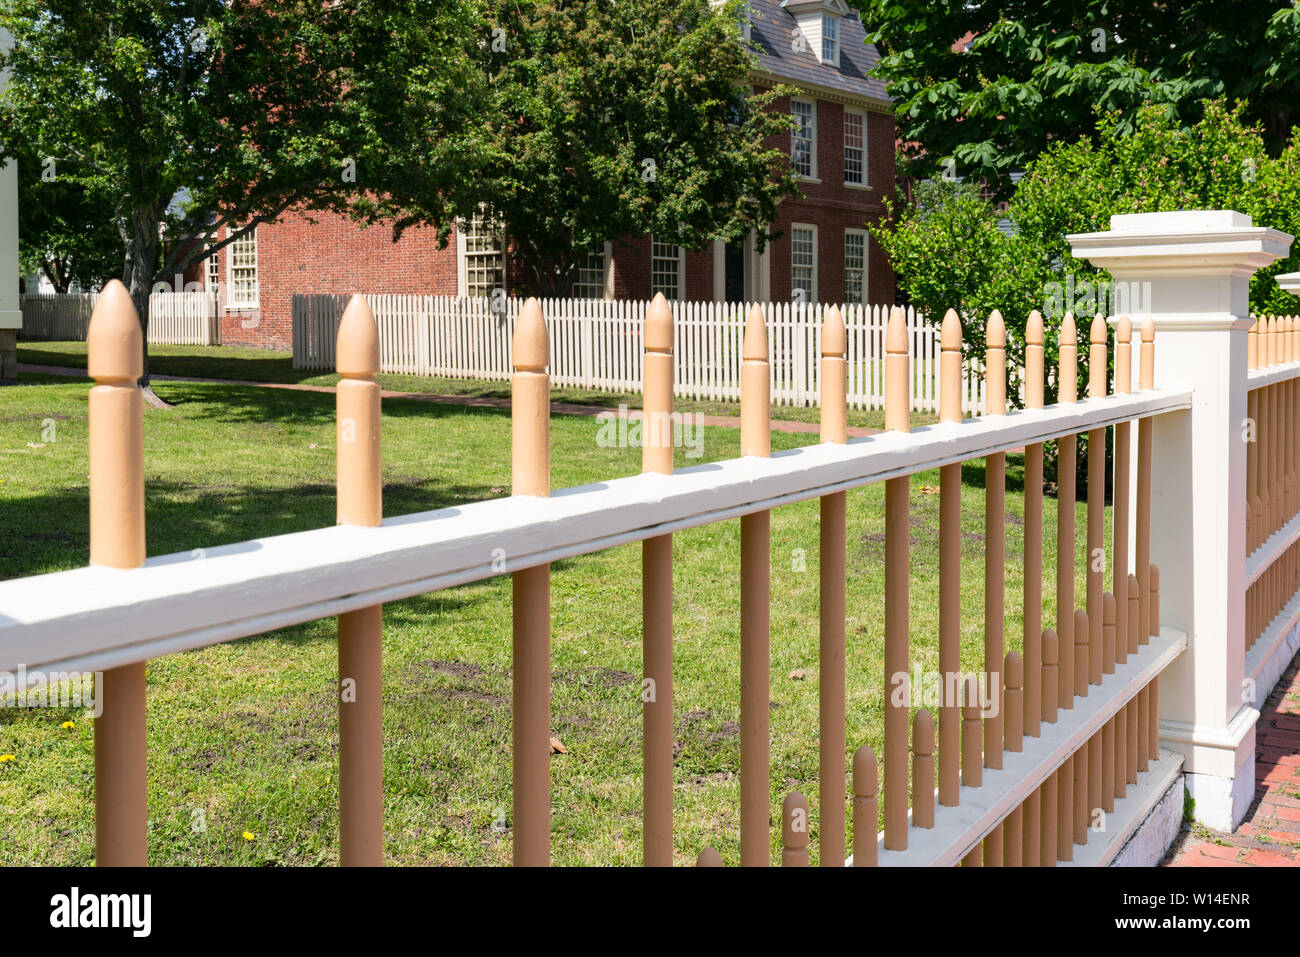 Wooden picket fence in front of historic home. Stock Photo